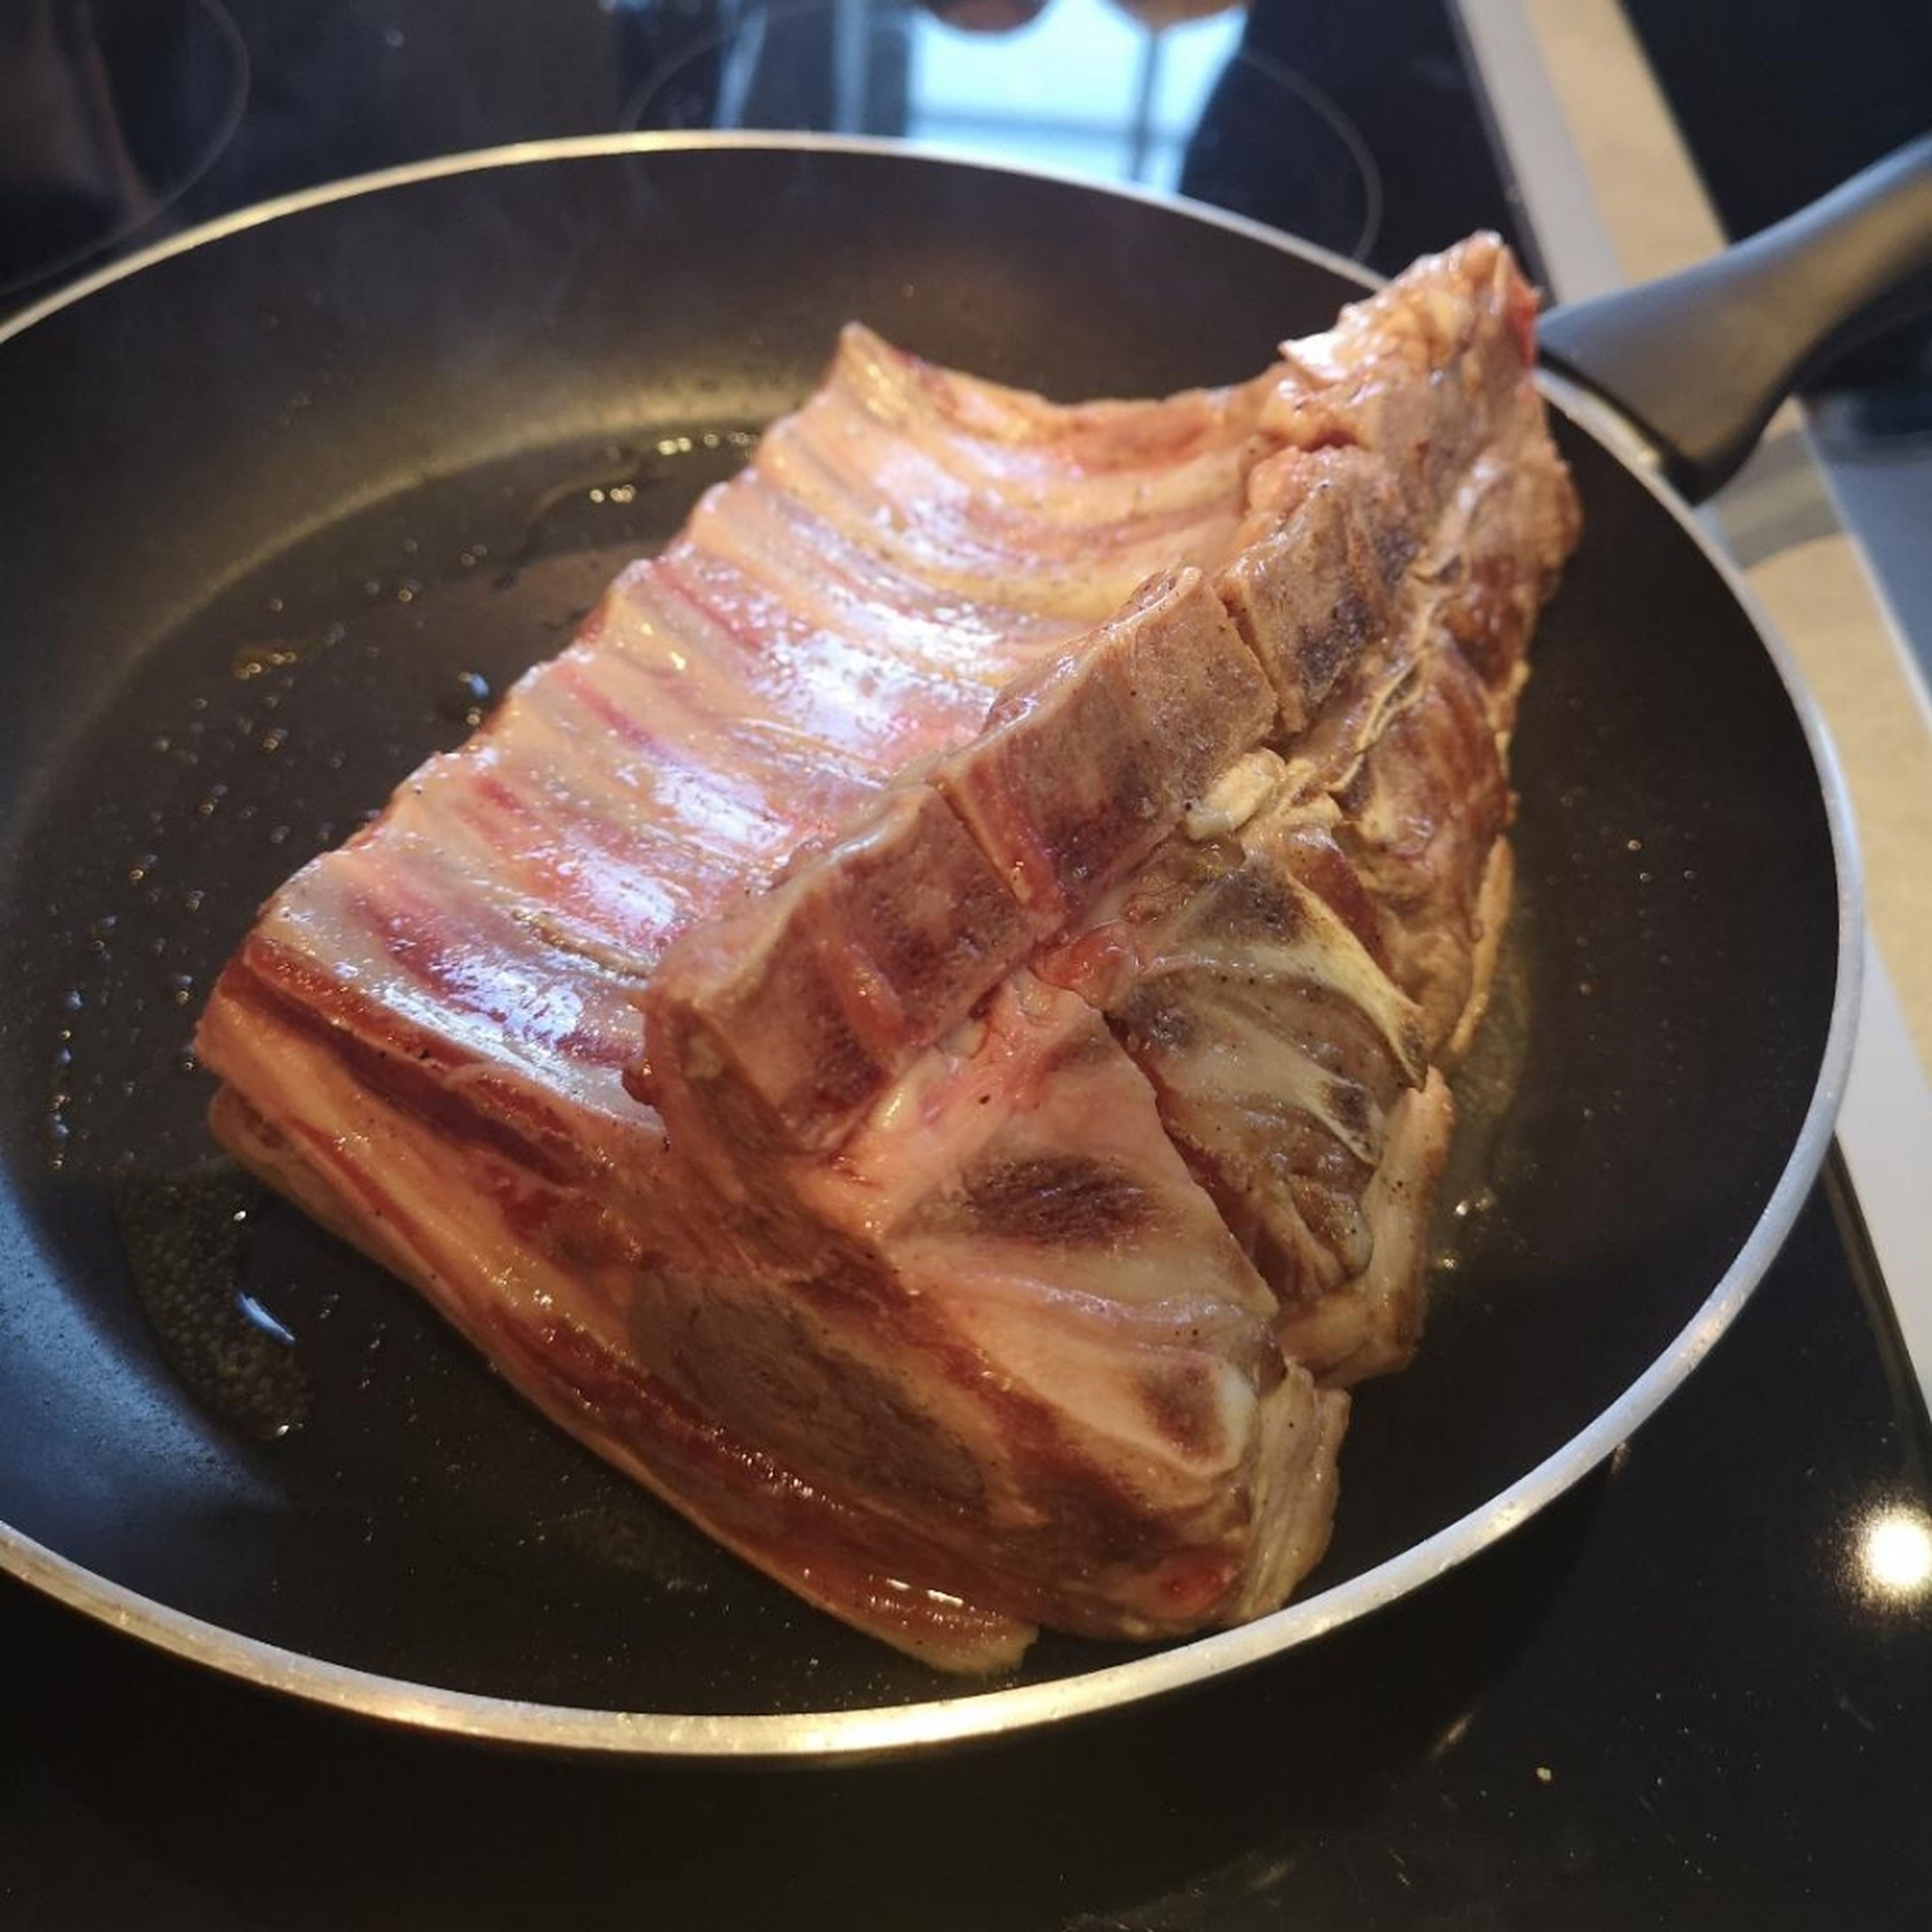 sear that meat! I don't use ant oil as the lamb fat will render, the key is to start with a very hot pan and place the rack fat side down then do all the other surfaces.